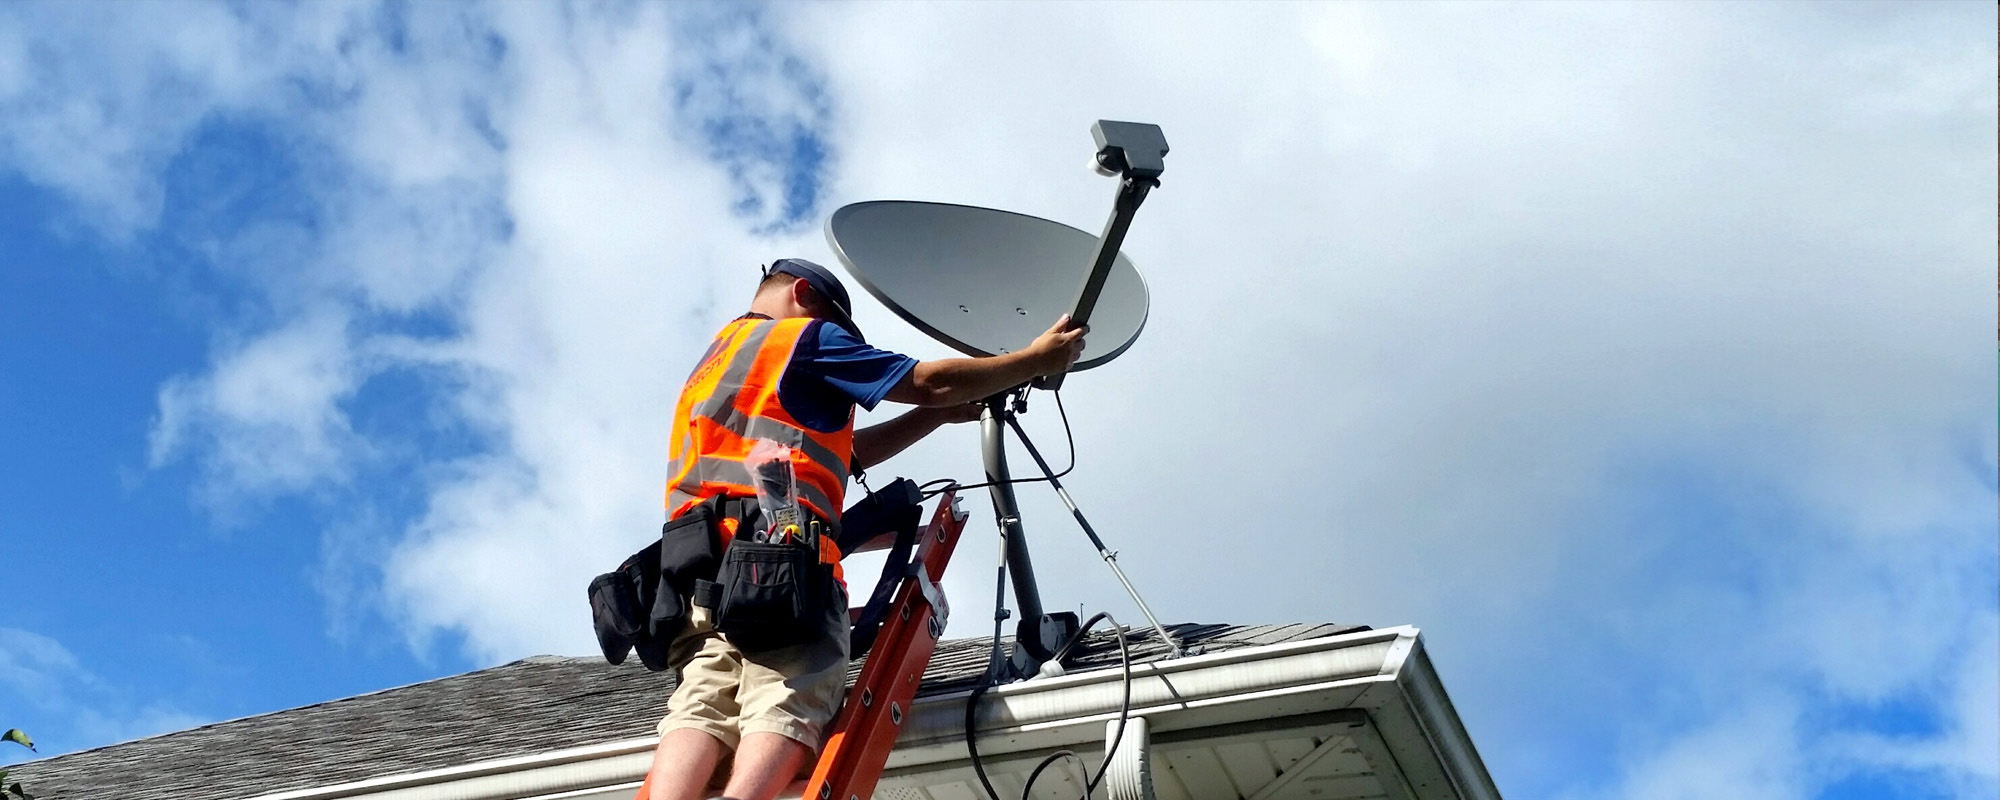 Man wearing an orange safety vest on a roof installing a satellite dish